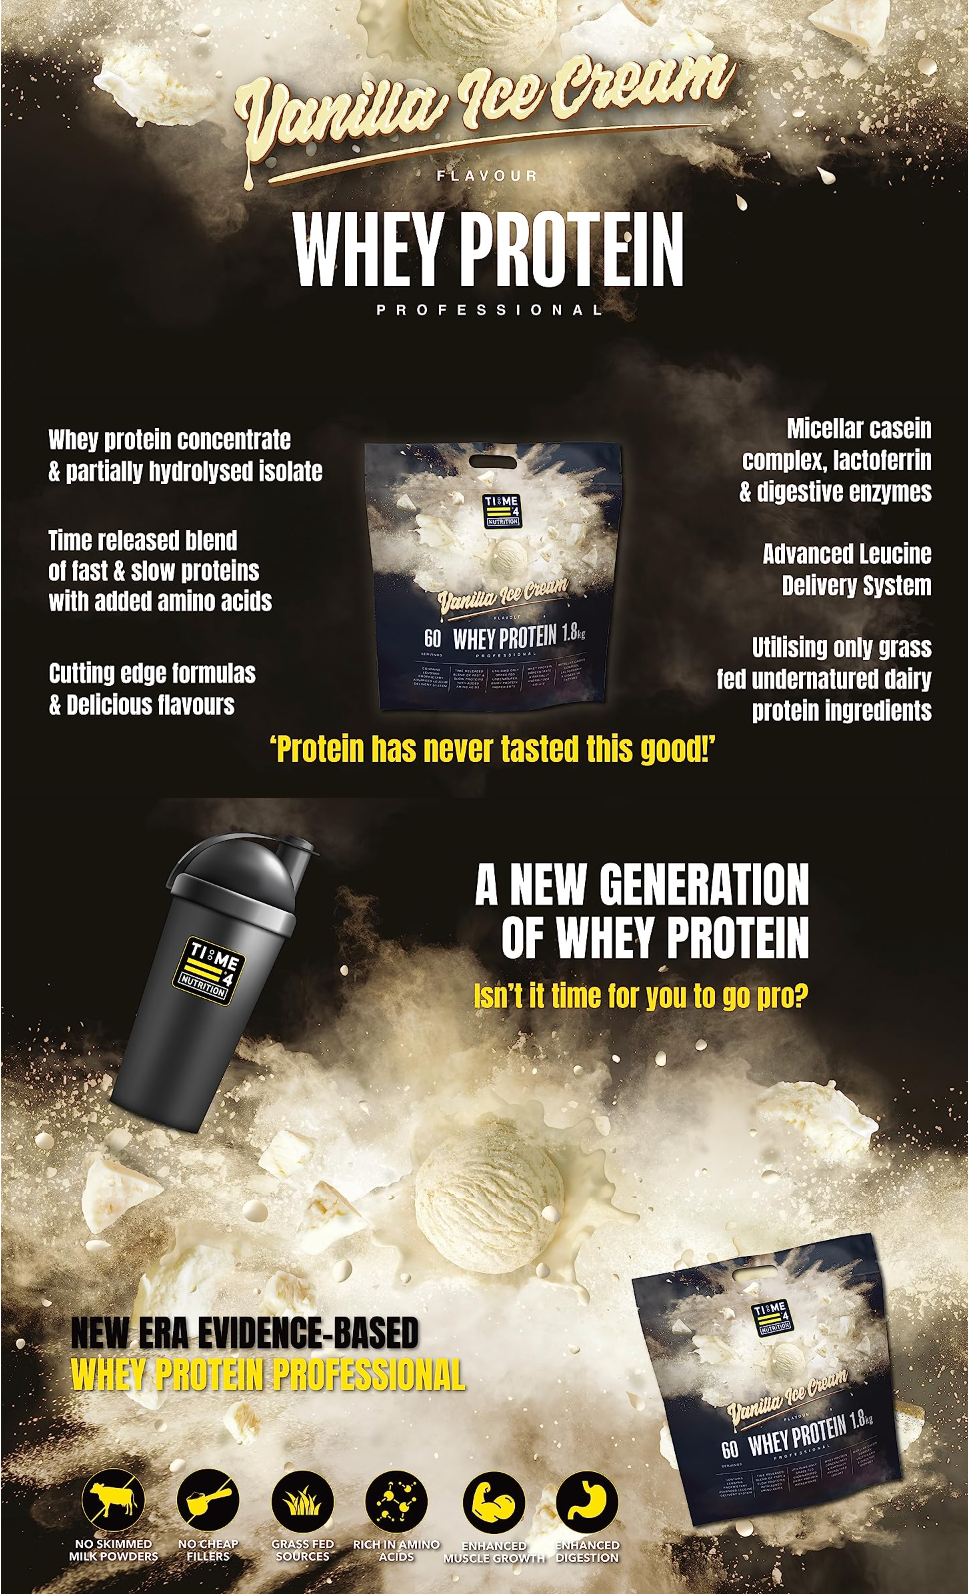 A poster for a new generation of whey protein.